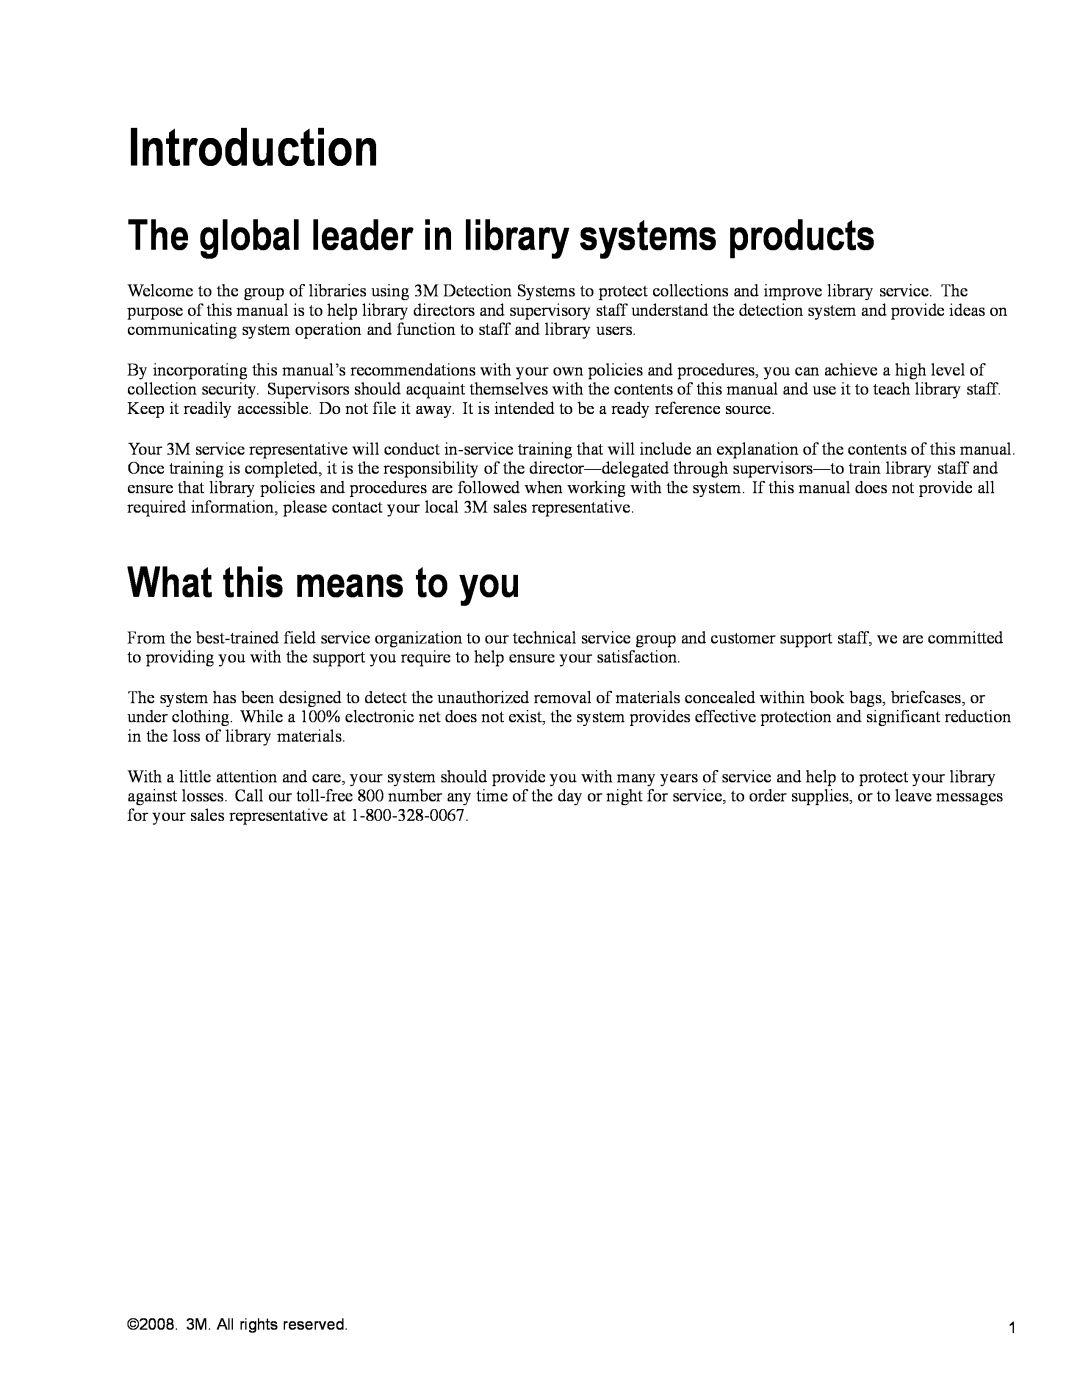 3M 700 Series owner manual Introduction, The global leader in library systems products, What this means to you 